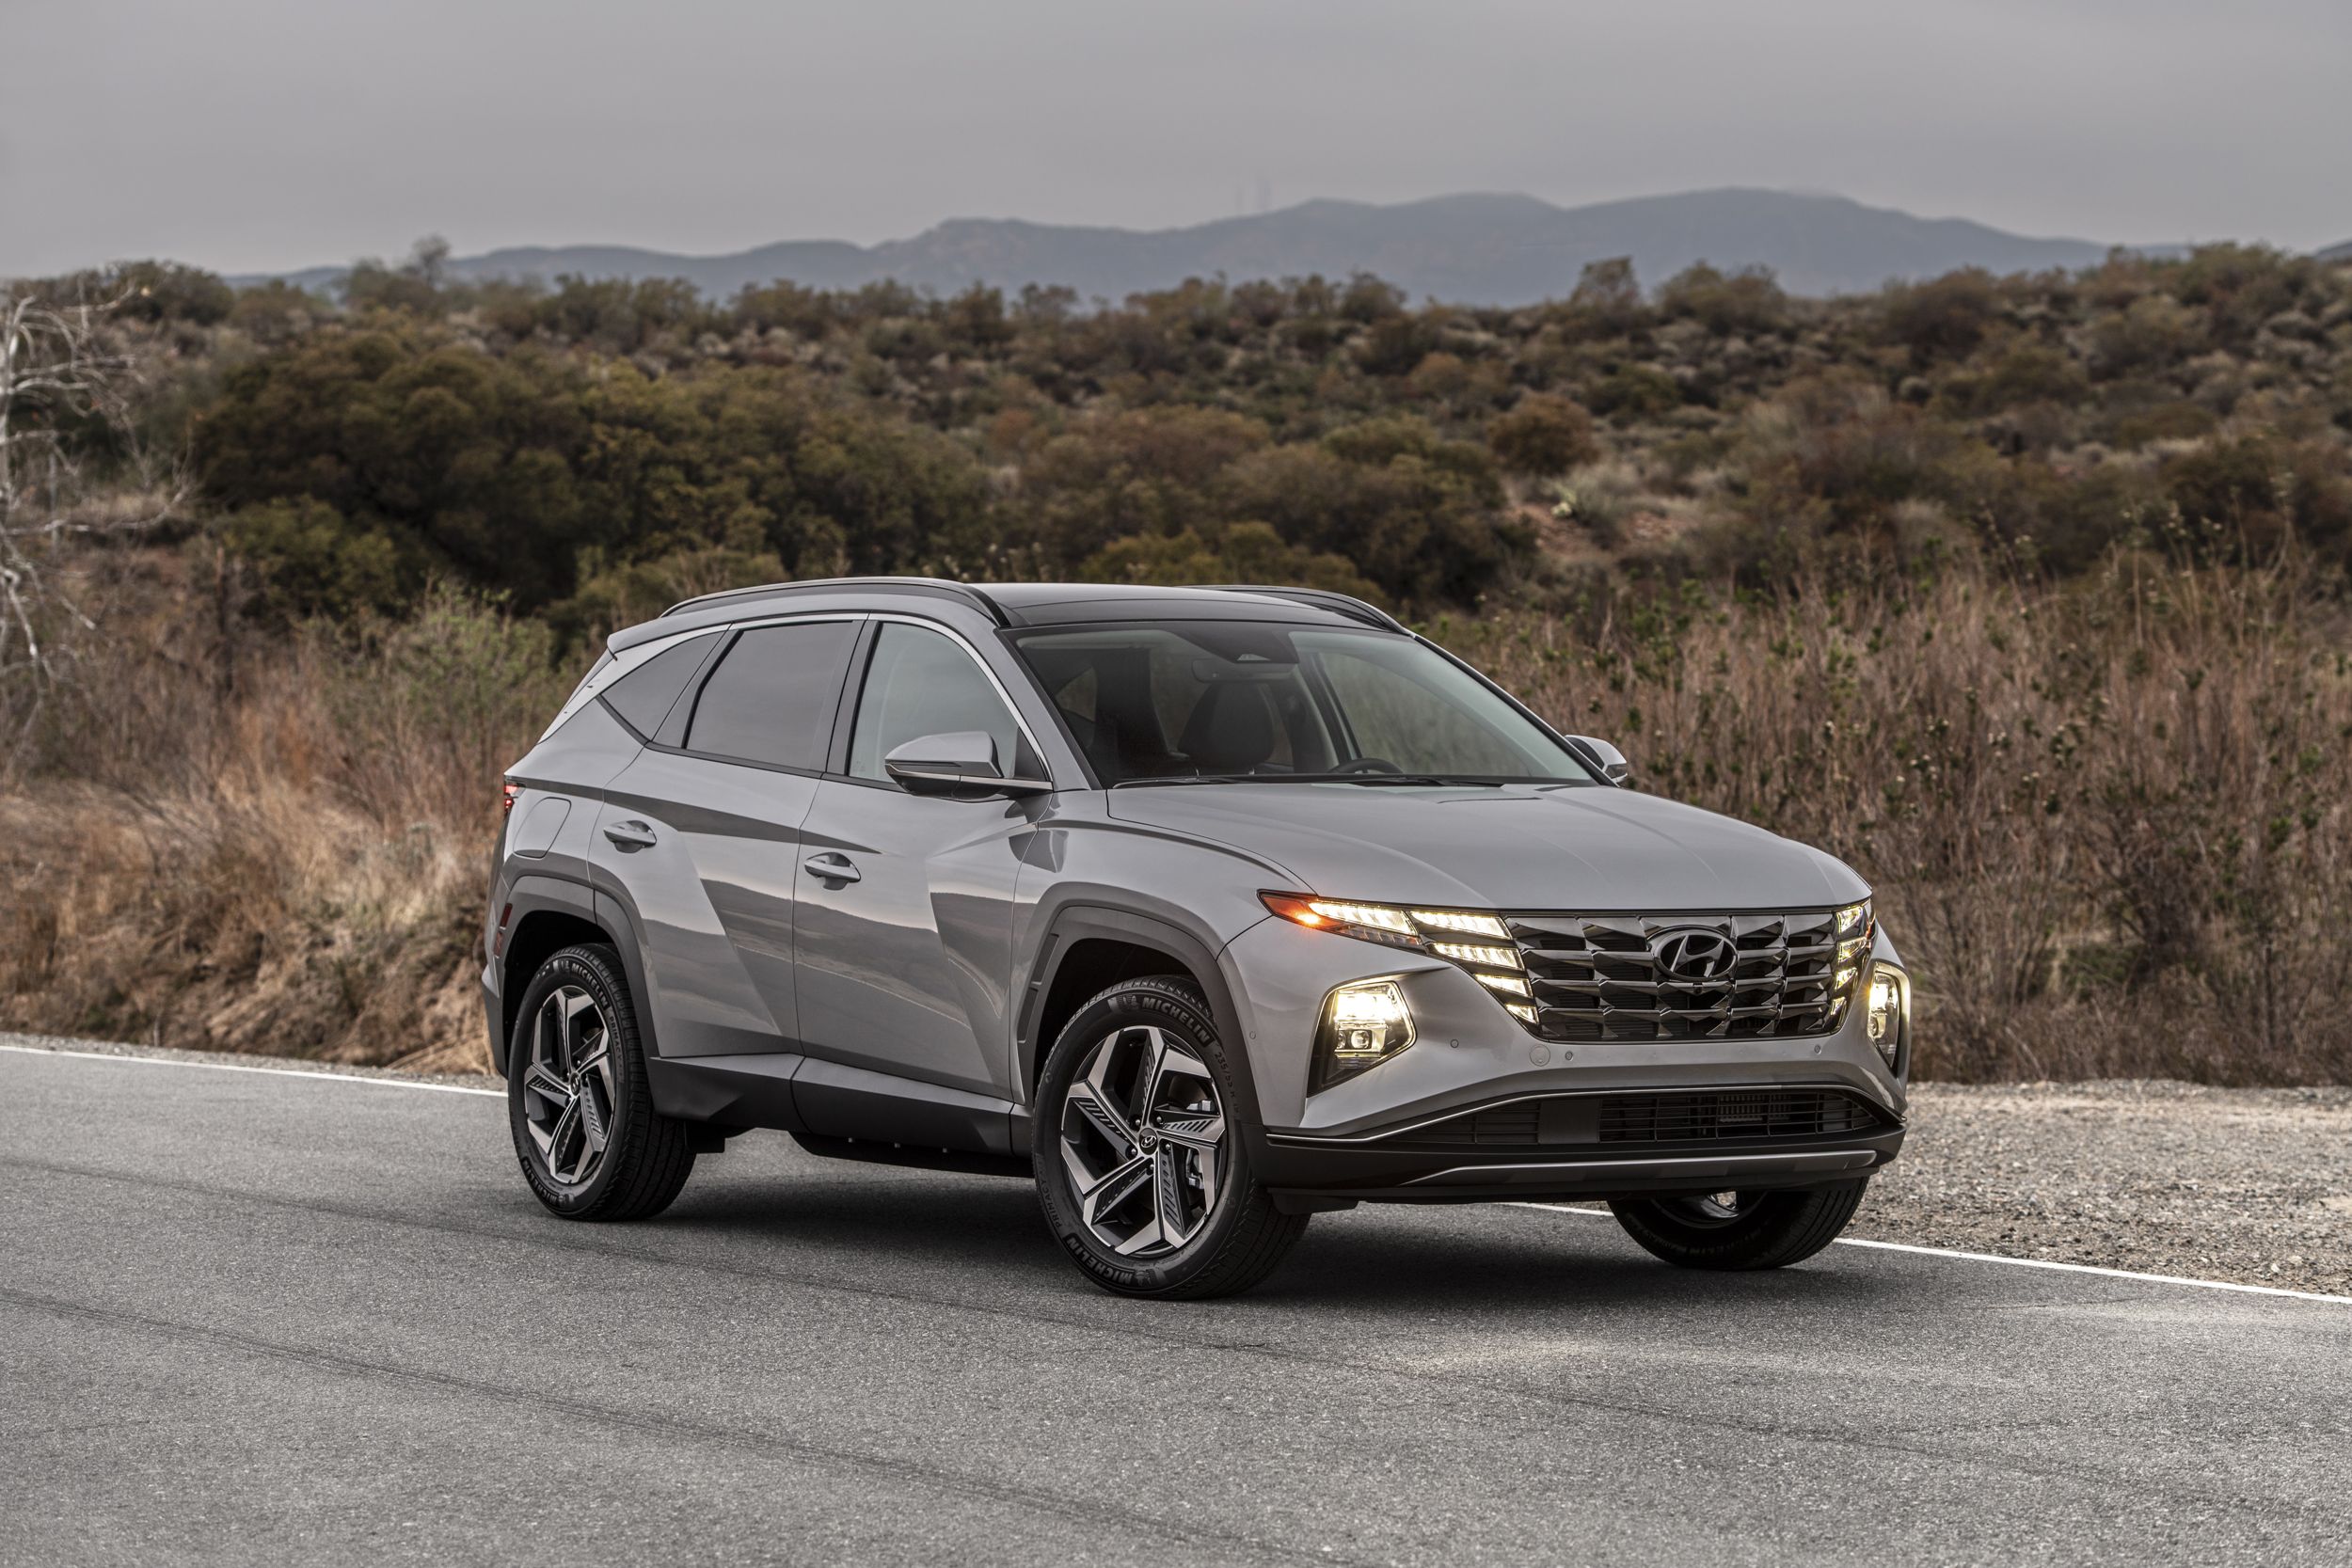 What is the gas mileage of the 2022 Hyundai Tucson?